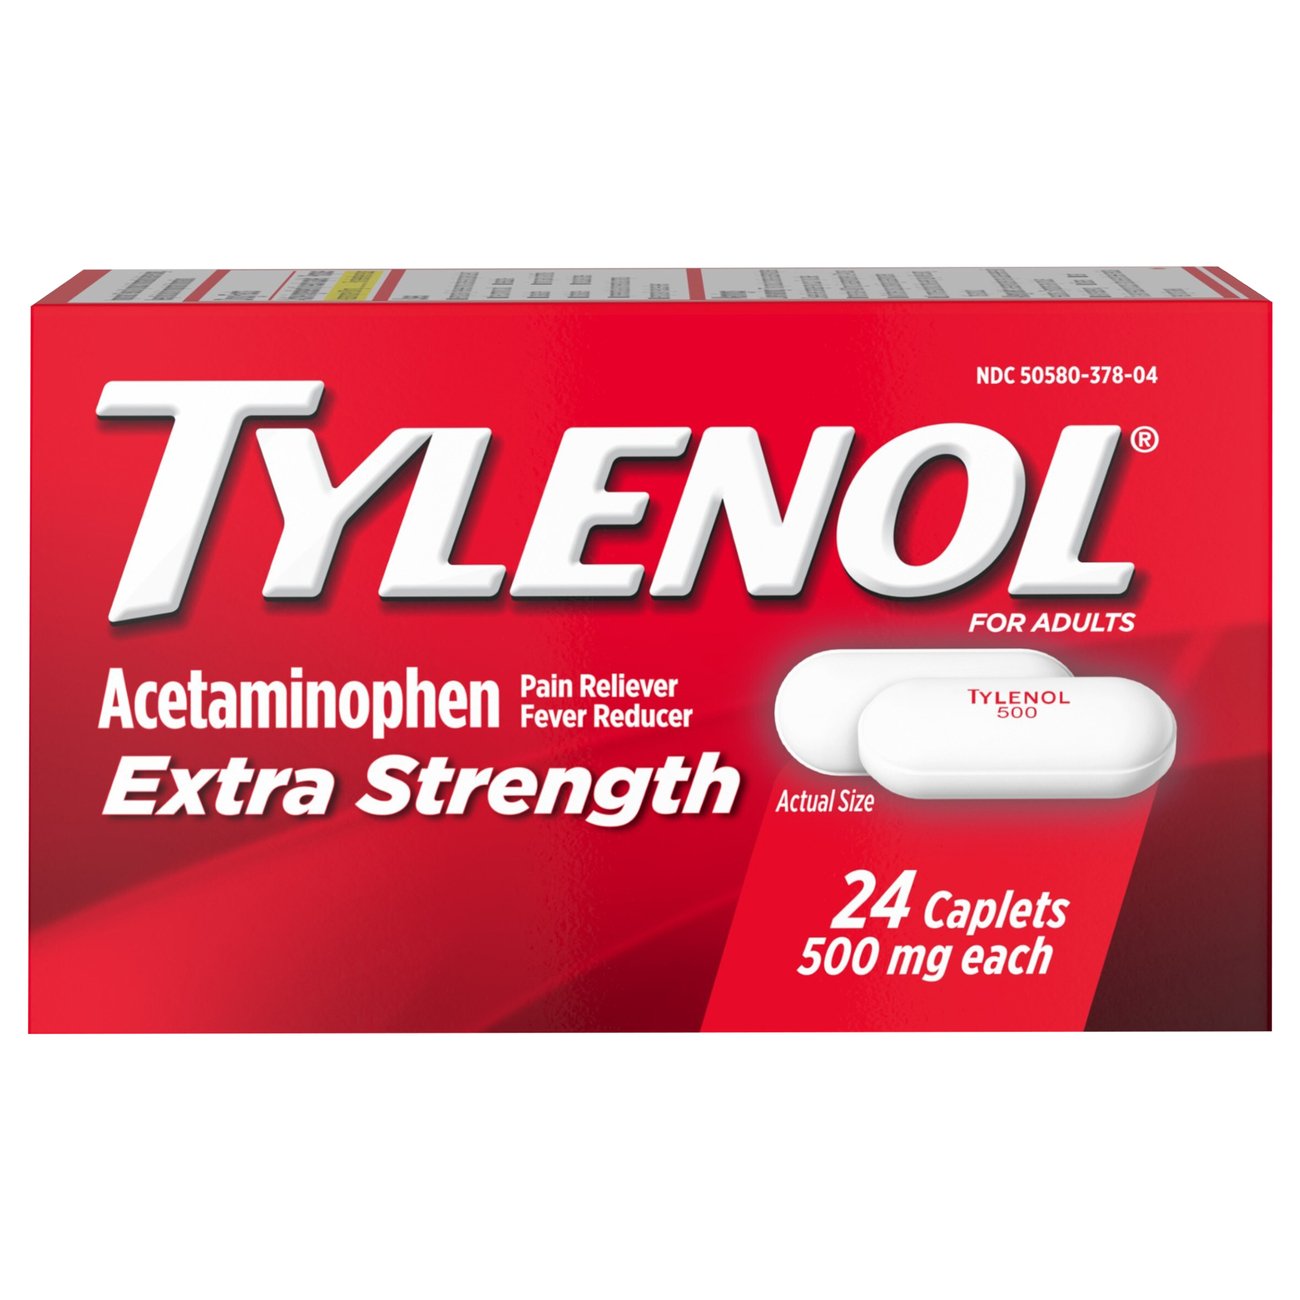 can dogs have extra strength tylenol